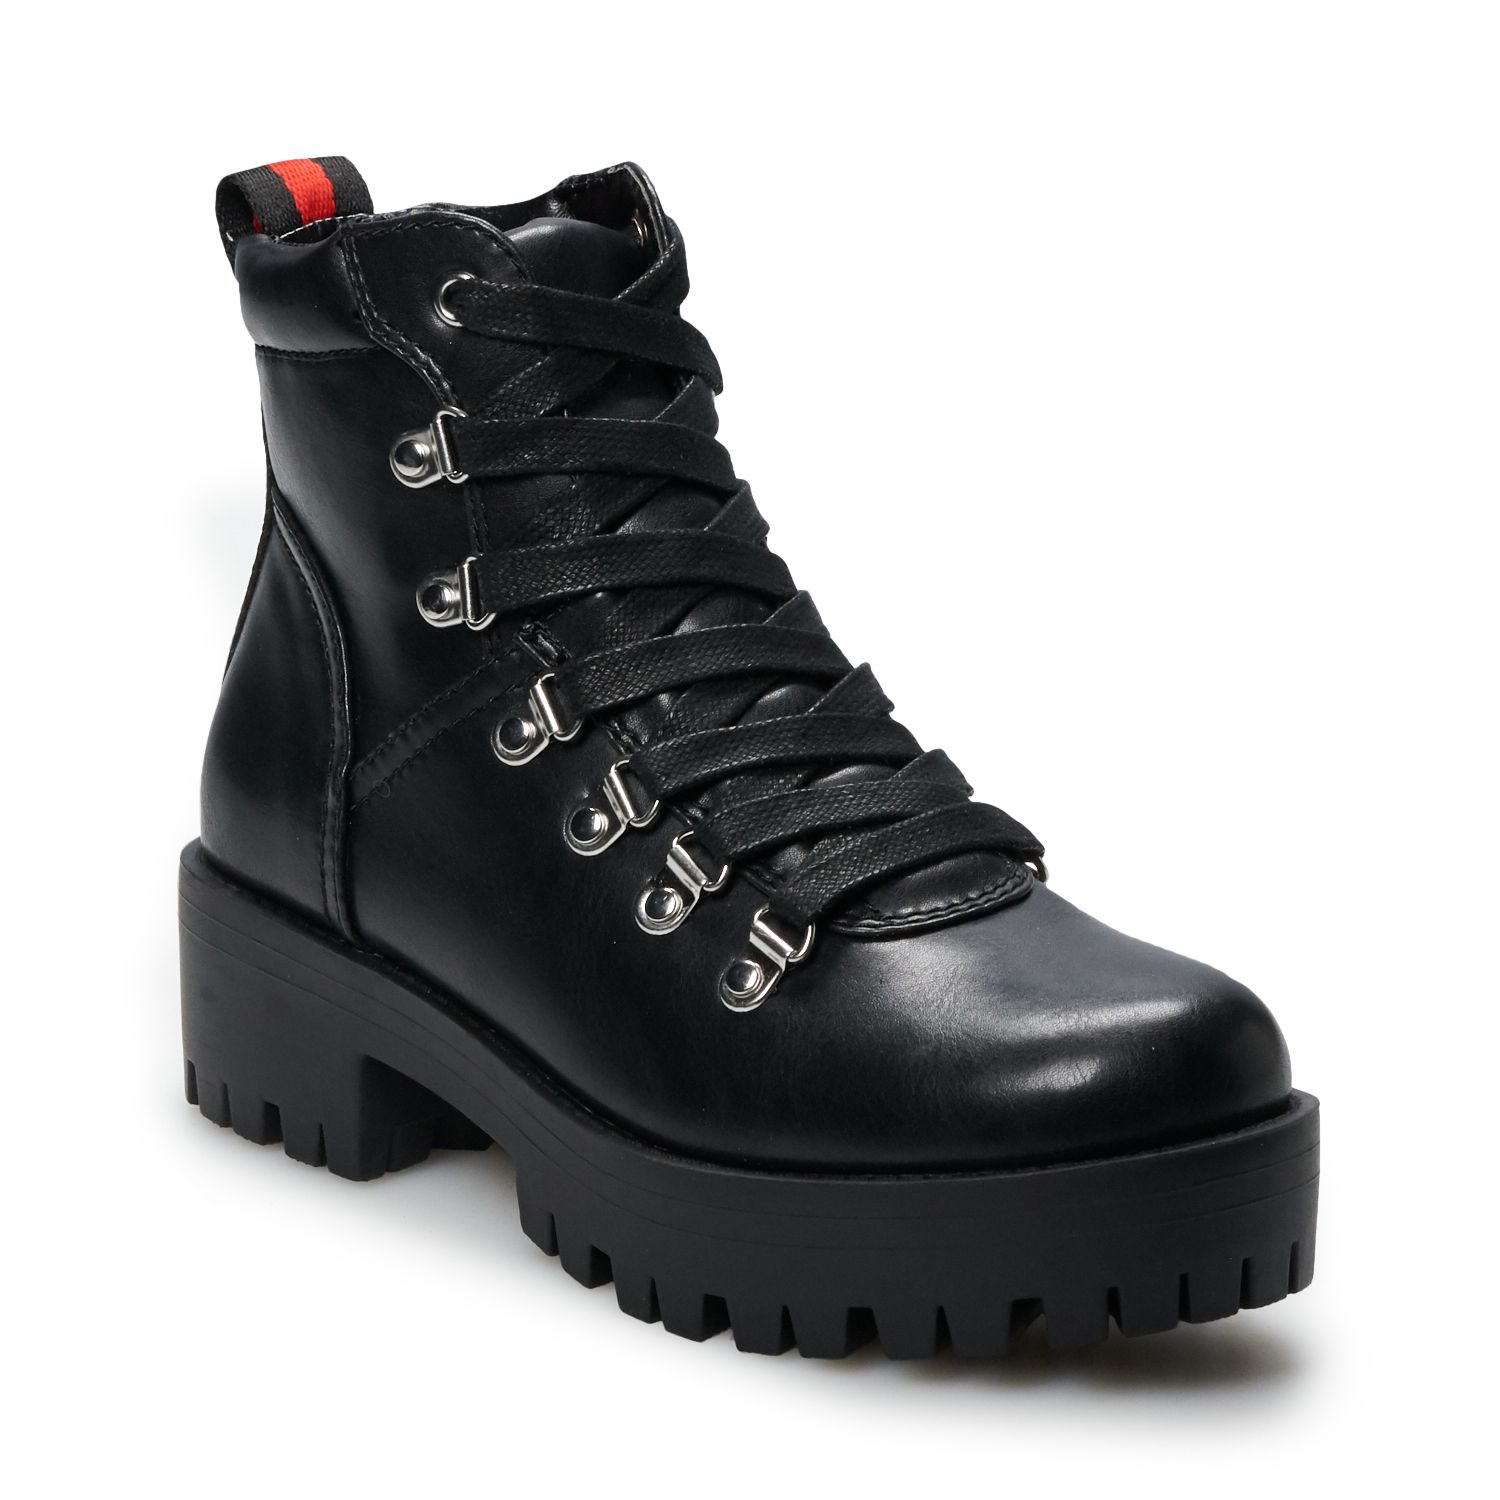 madden NYC Barclay Women's Combat Boots